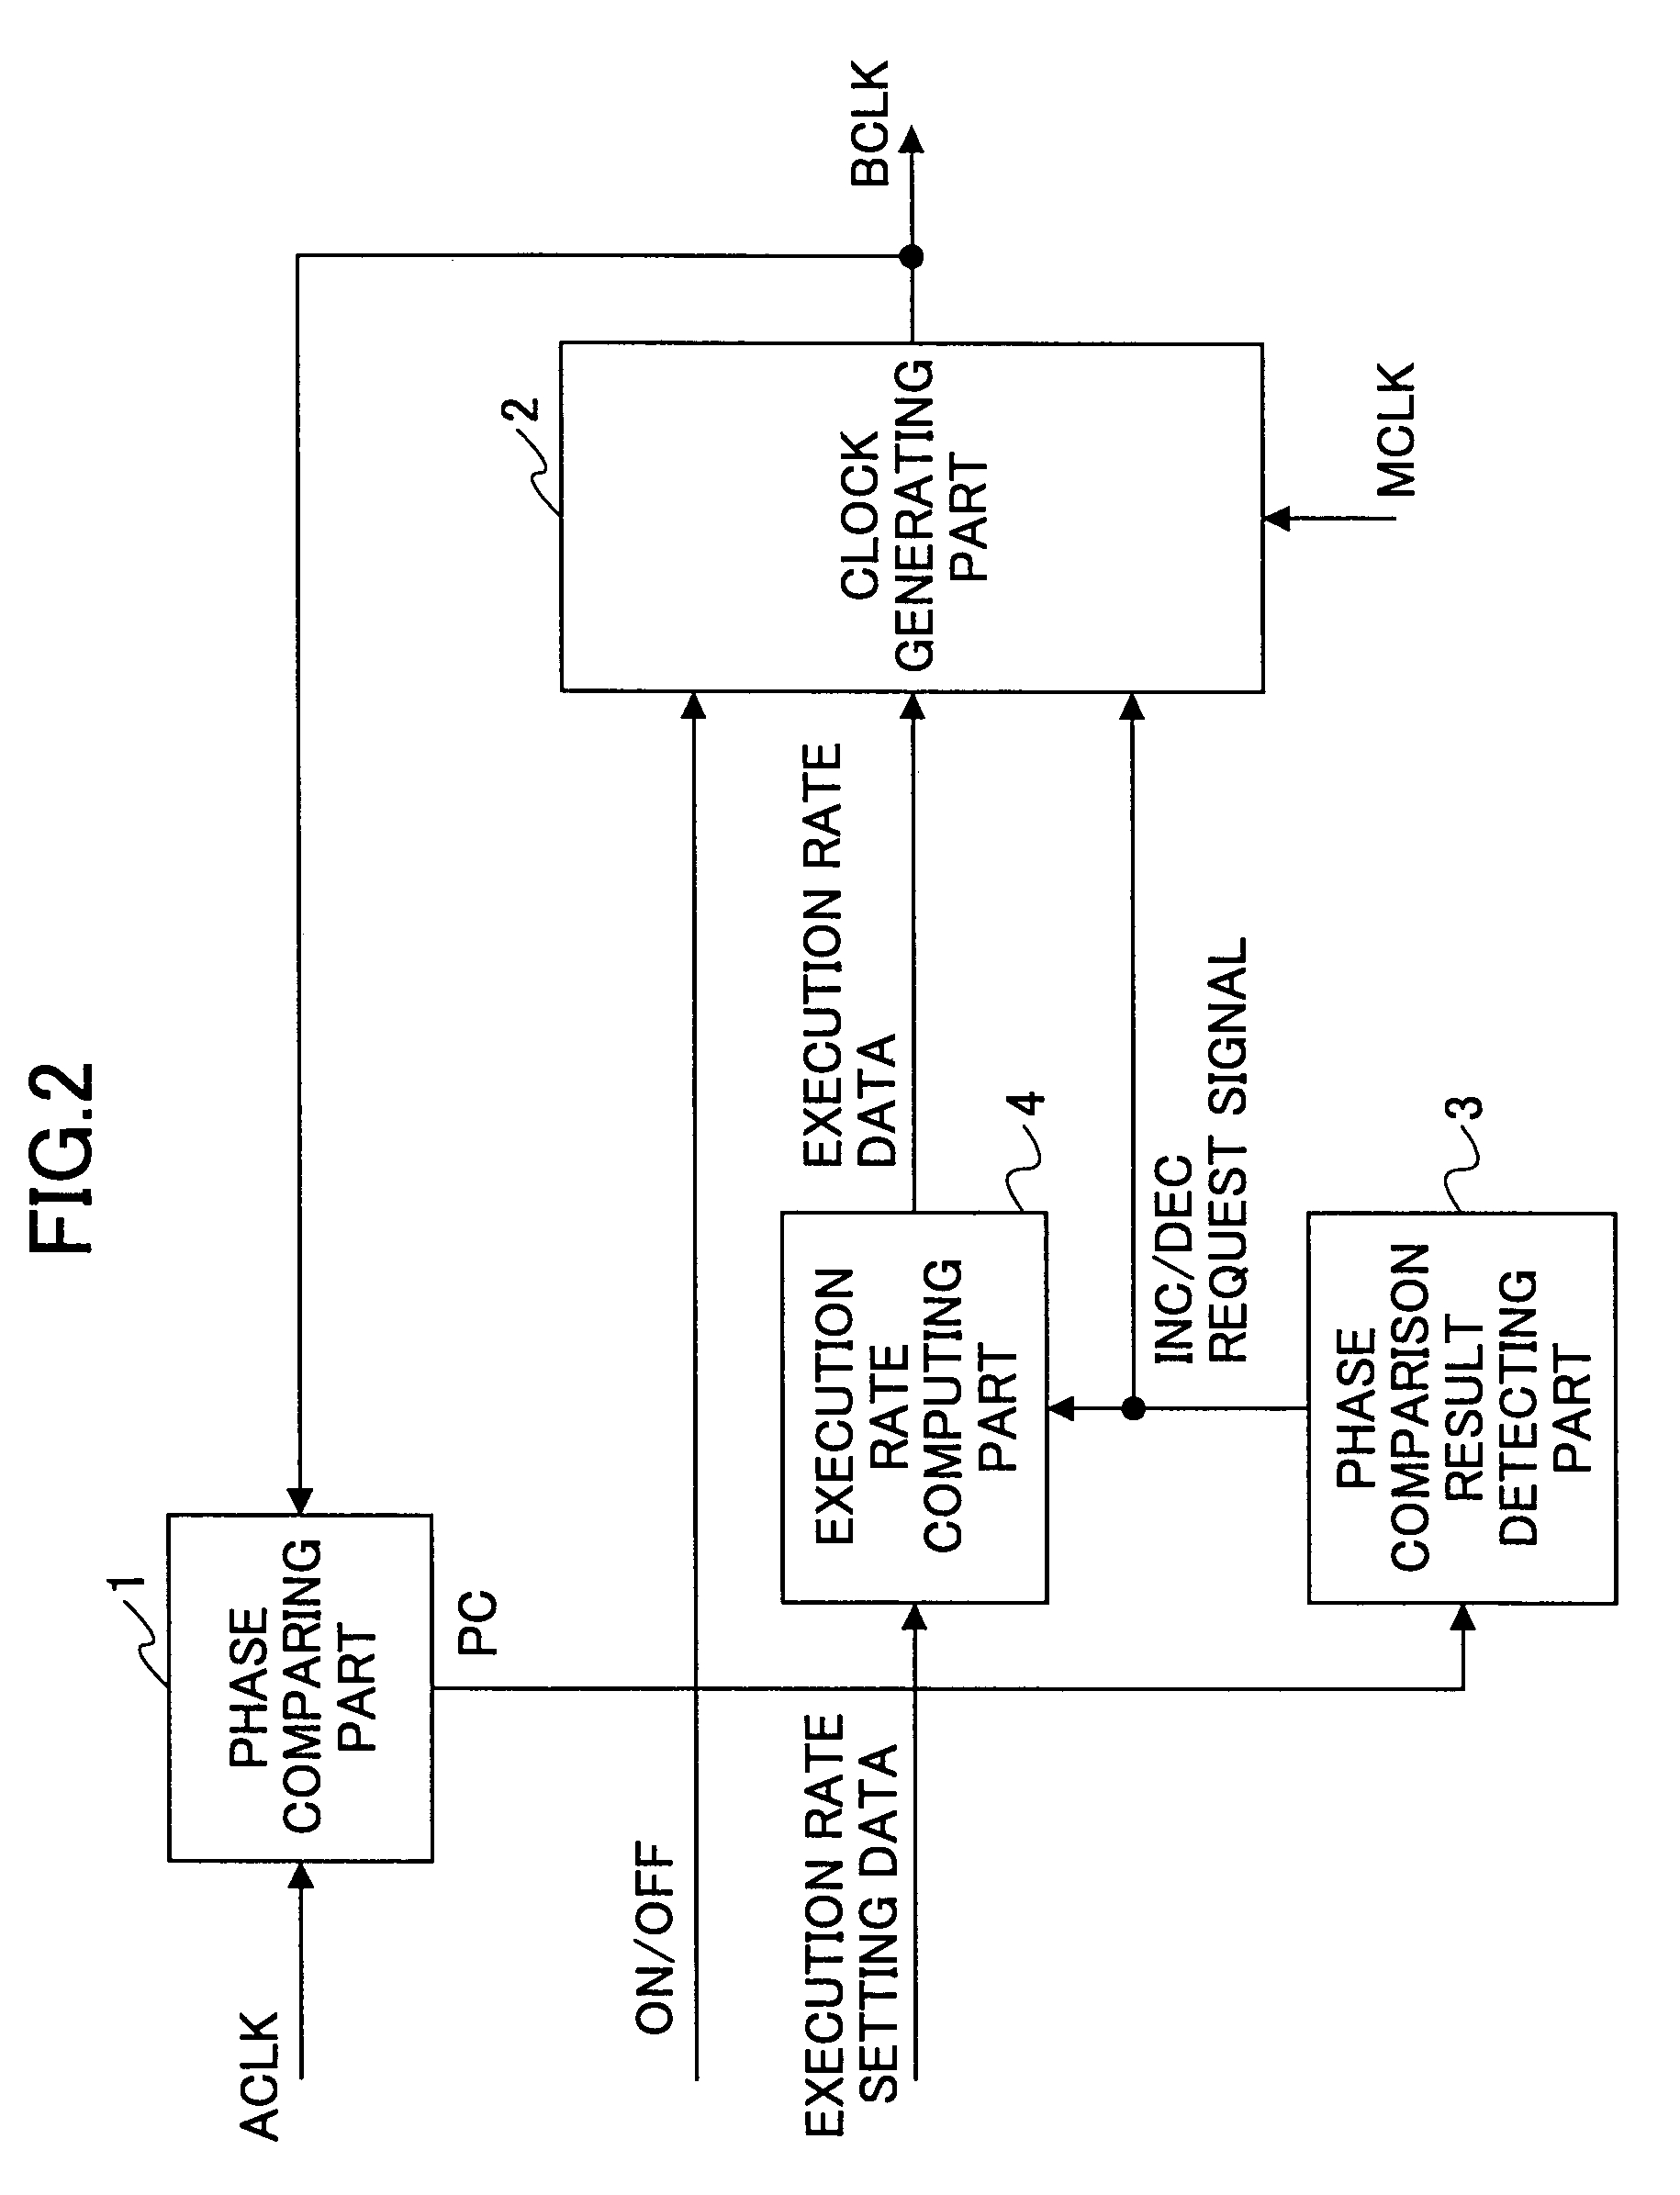 Digital phase locked circuit capable of dealing with input clock signal provided in burst fashion